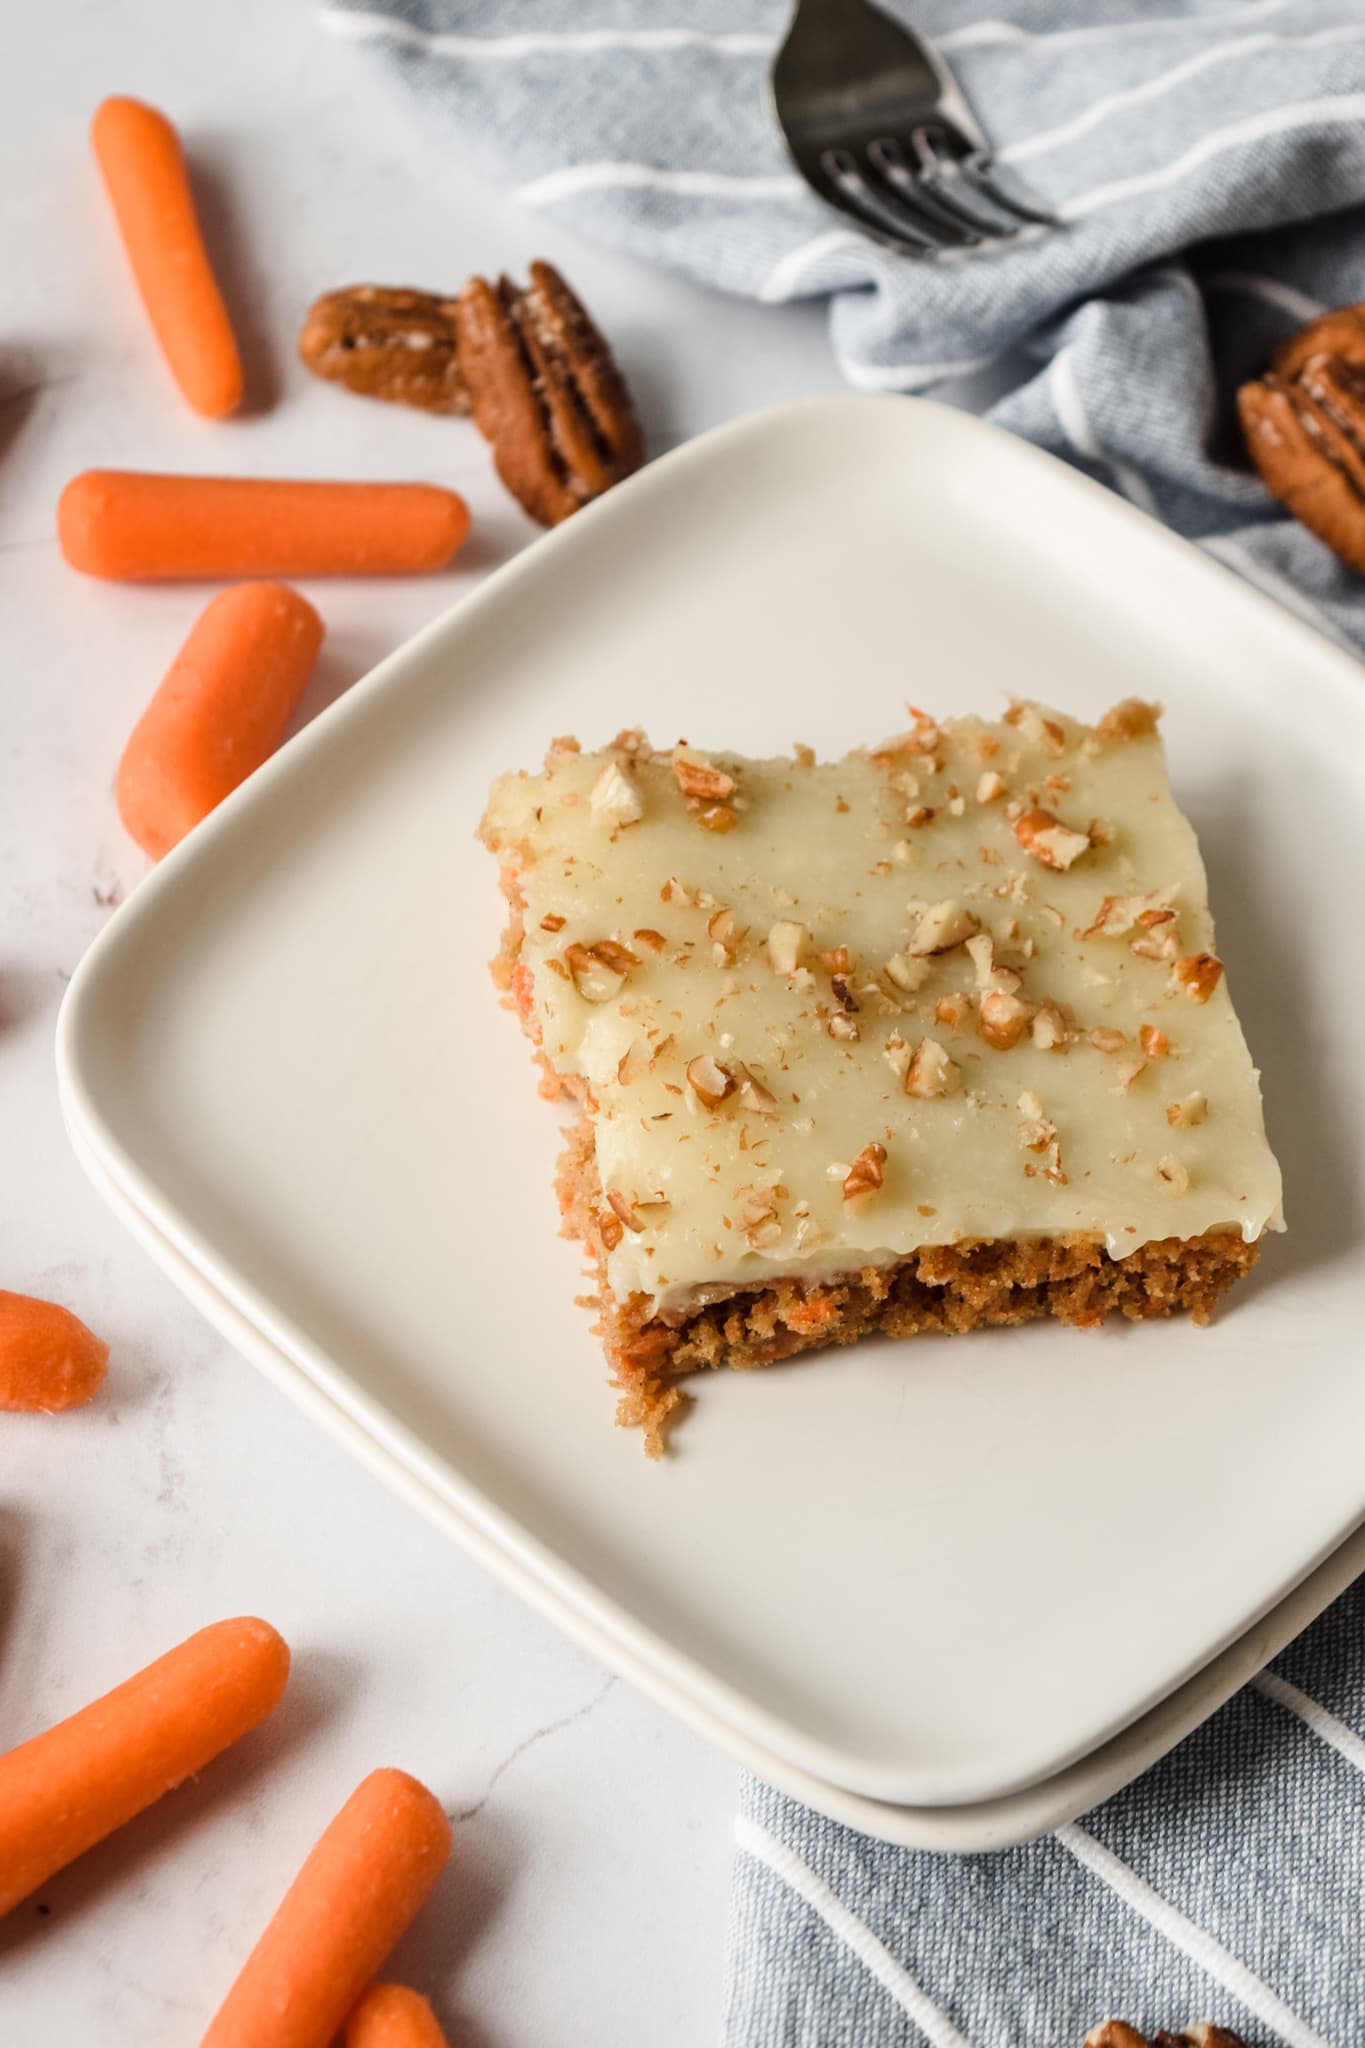 Slice of Gluten Free Carrot Sheet Cake on White Plate with Chopped Pecans